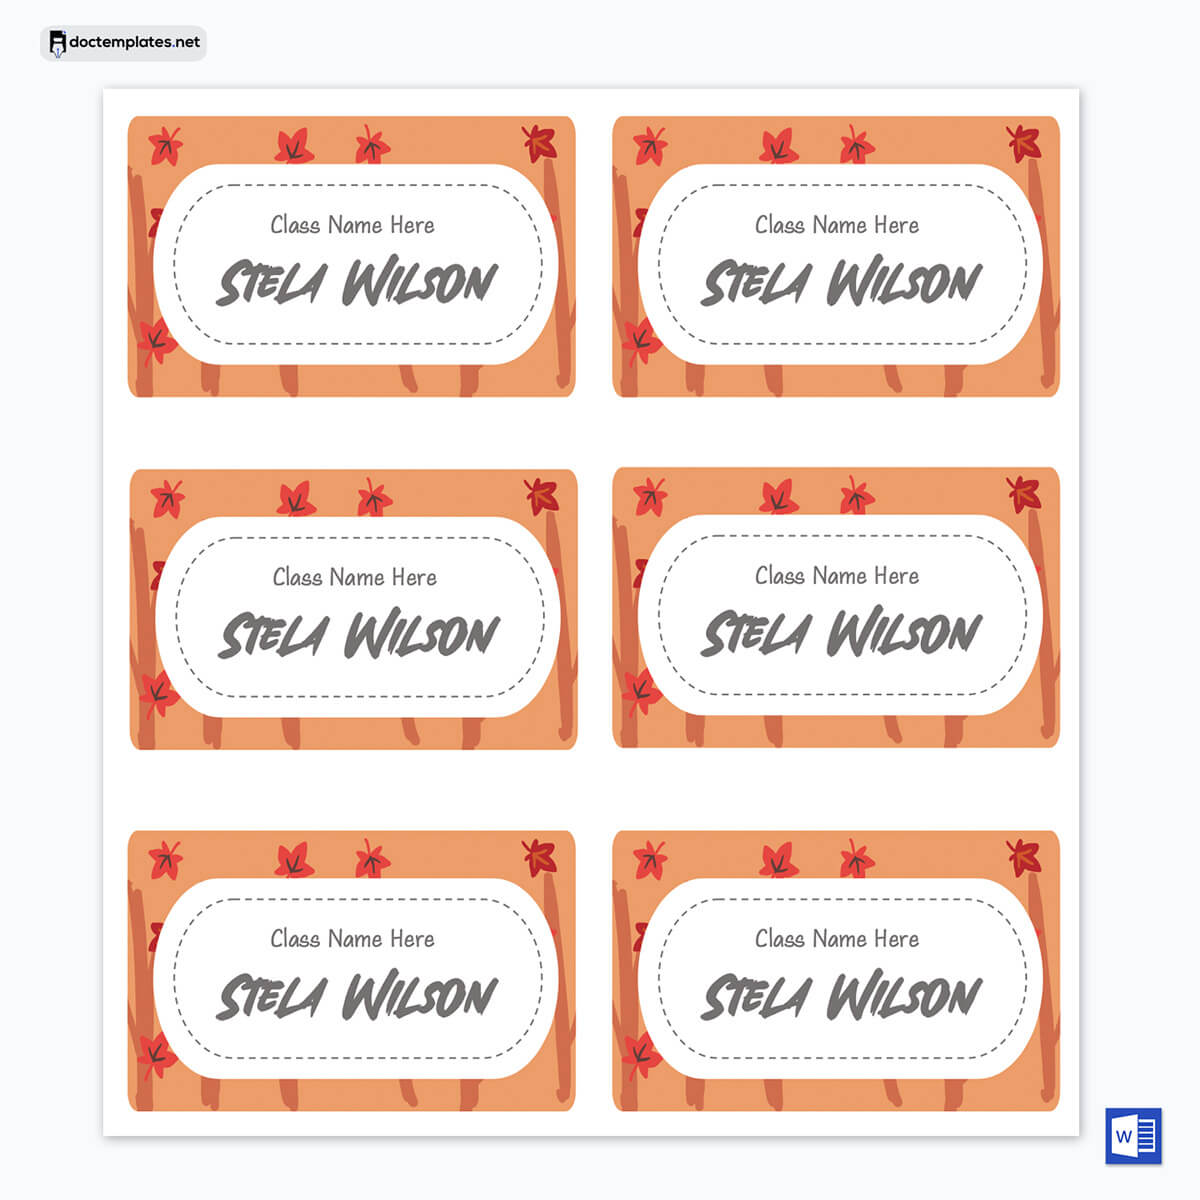 "Elevate Networking with Avery Name Tag Template - 20 Editable Samples"